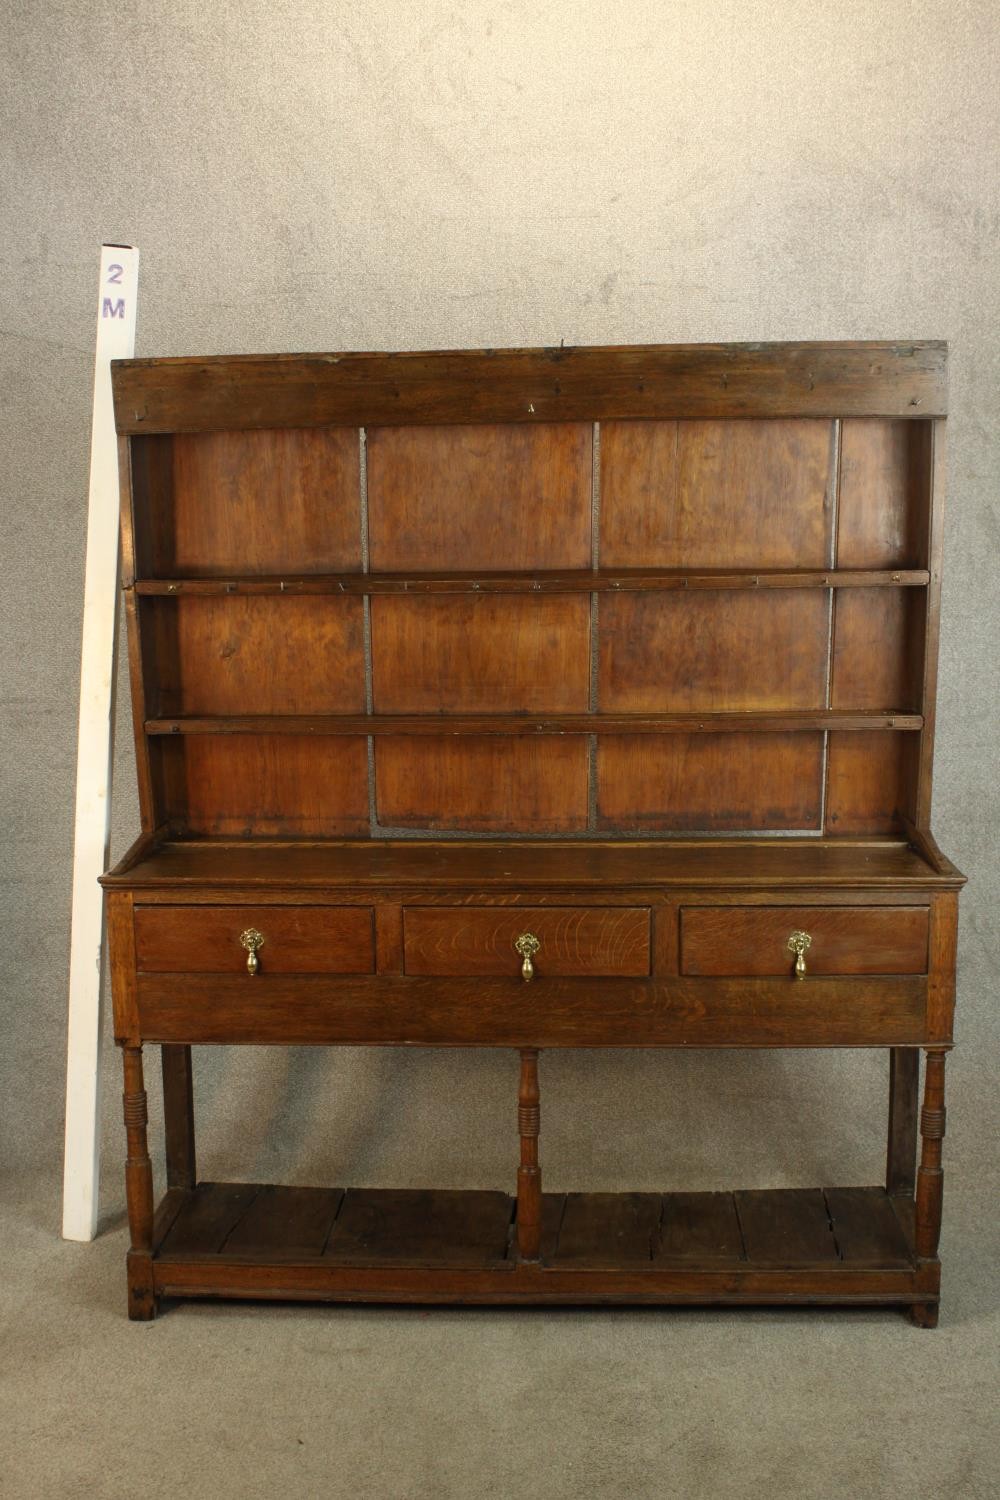 A 19th/early 20th century oak kitchen dresser, with plate rack back standing above three drawers - Image 2 of 4